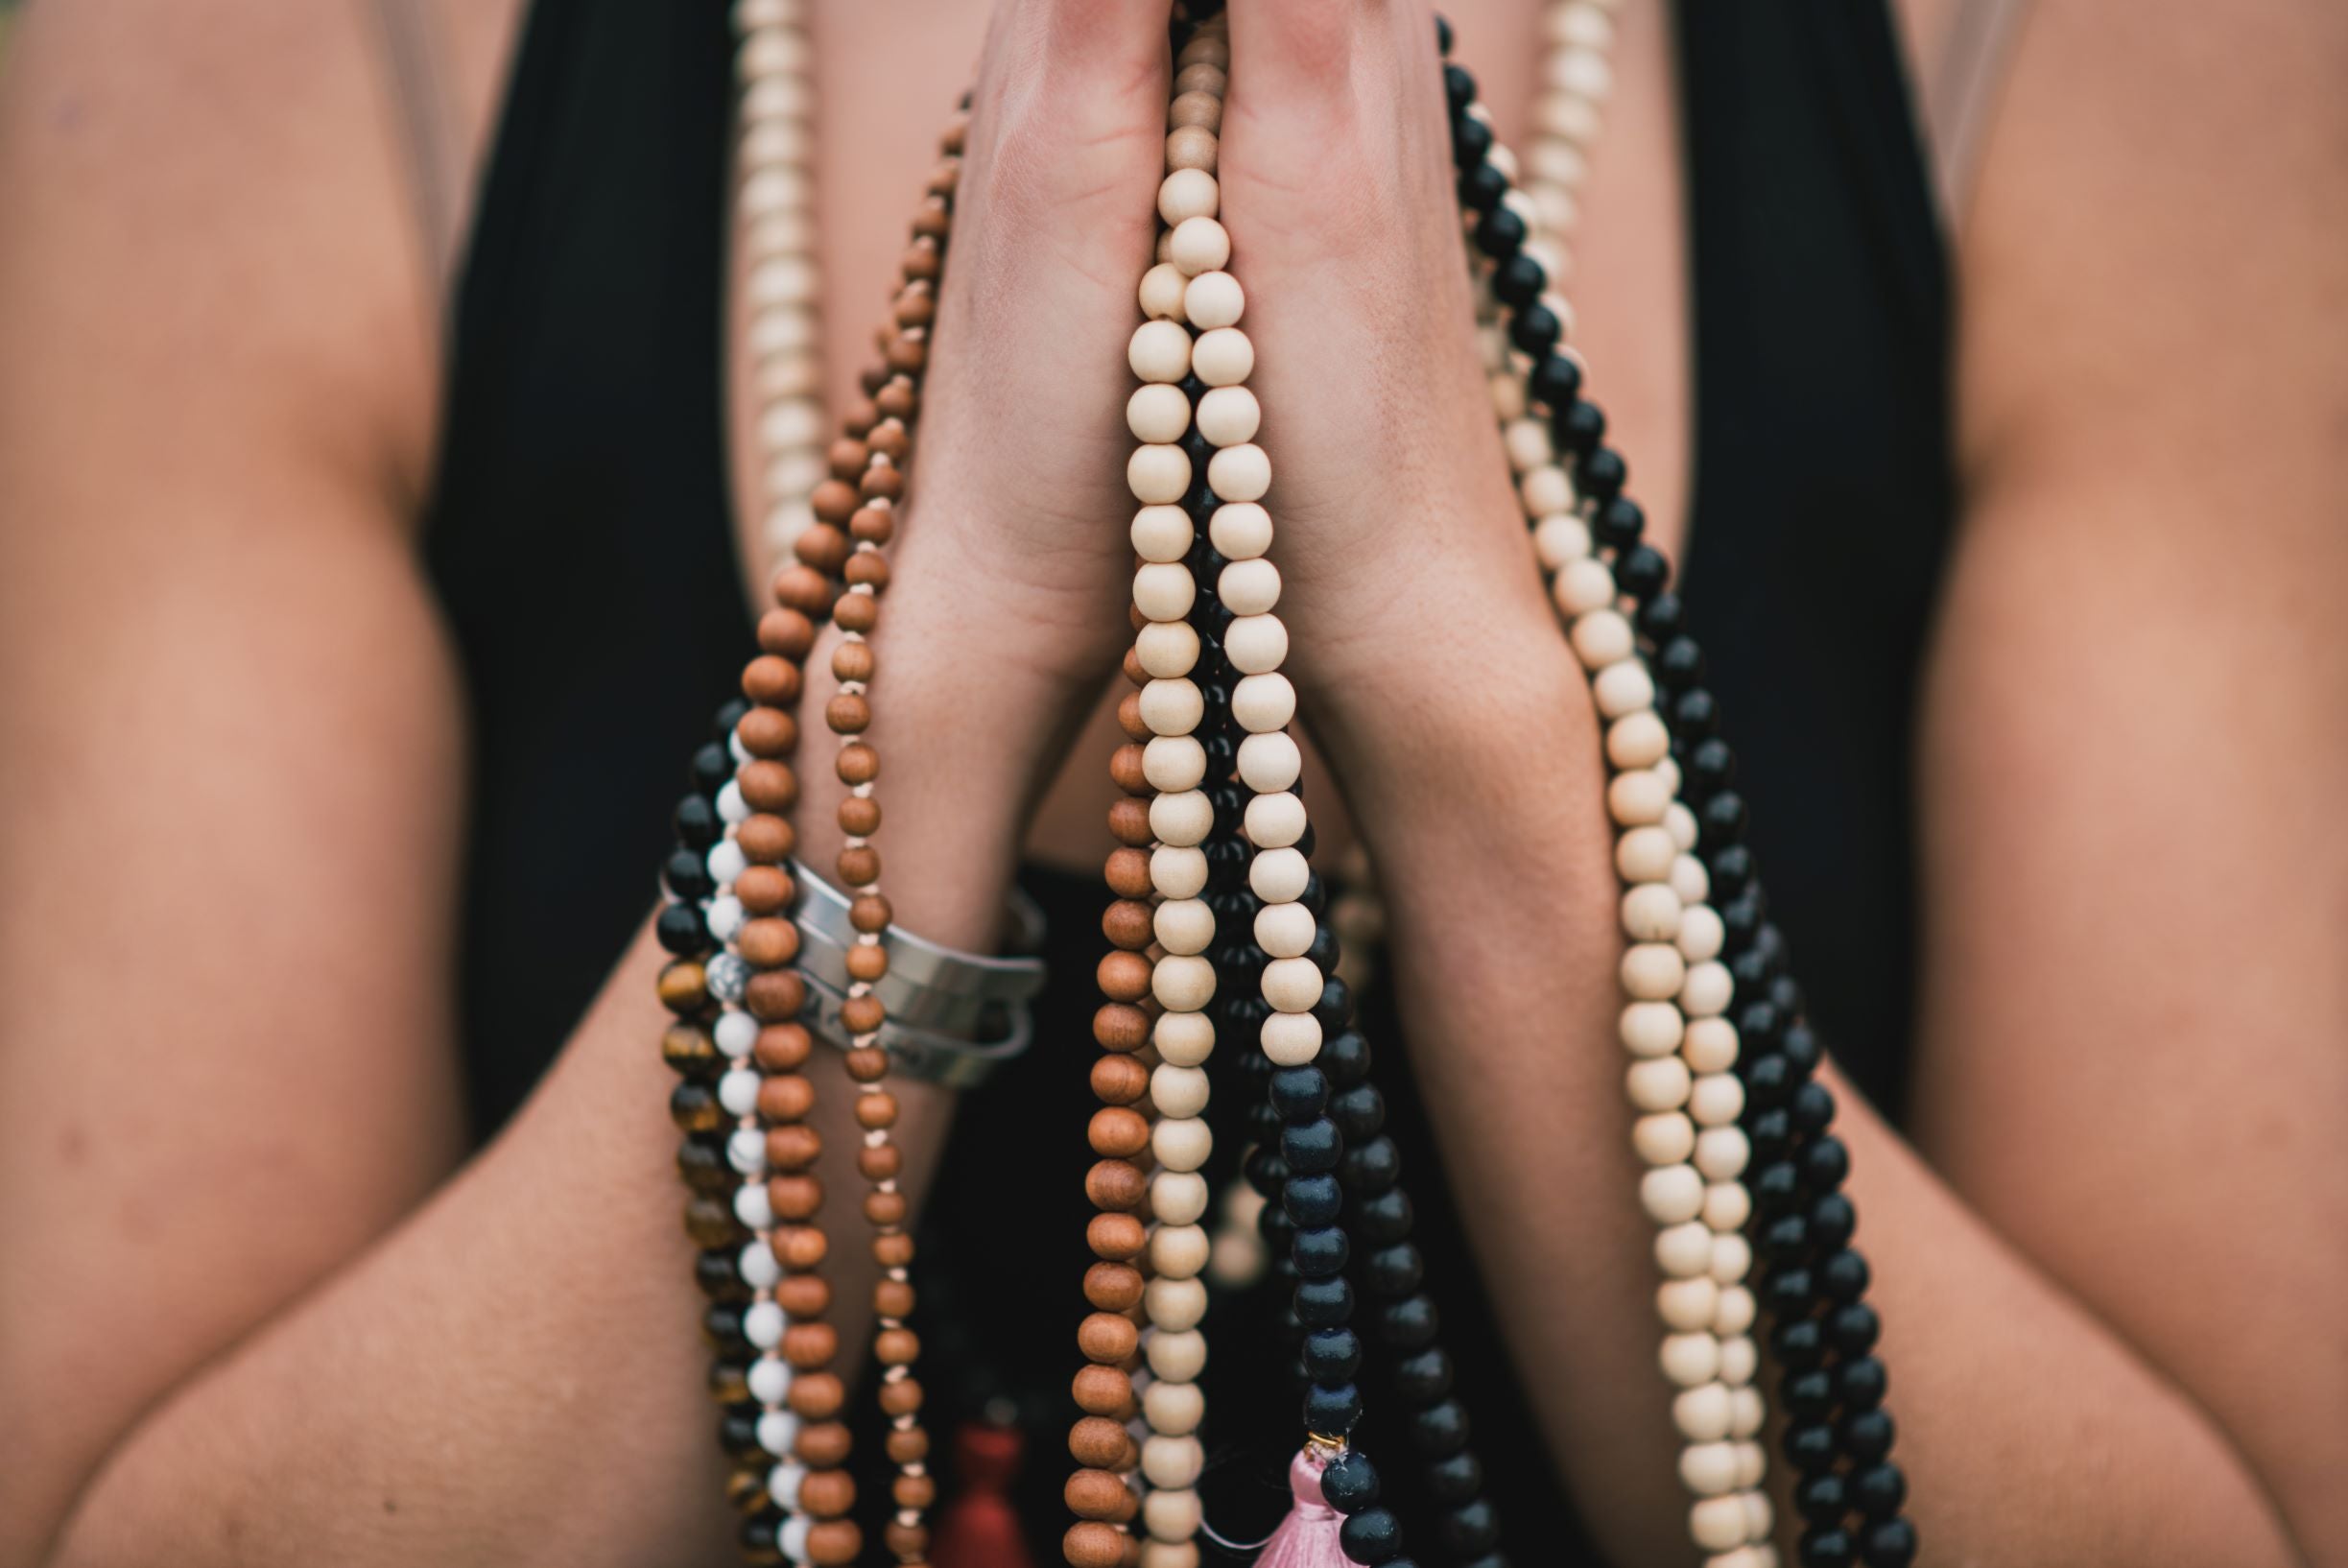 Hands held in prayer while holding handmade mala necklaces, meditating to cleanse the crystals.